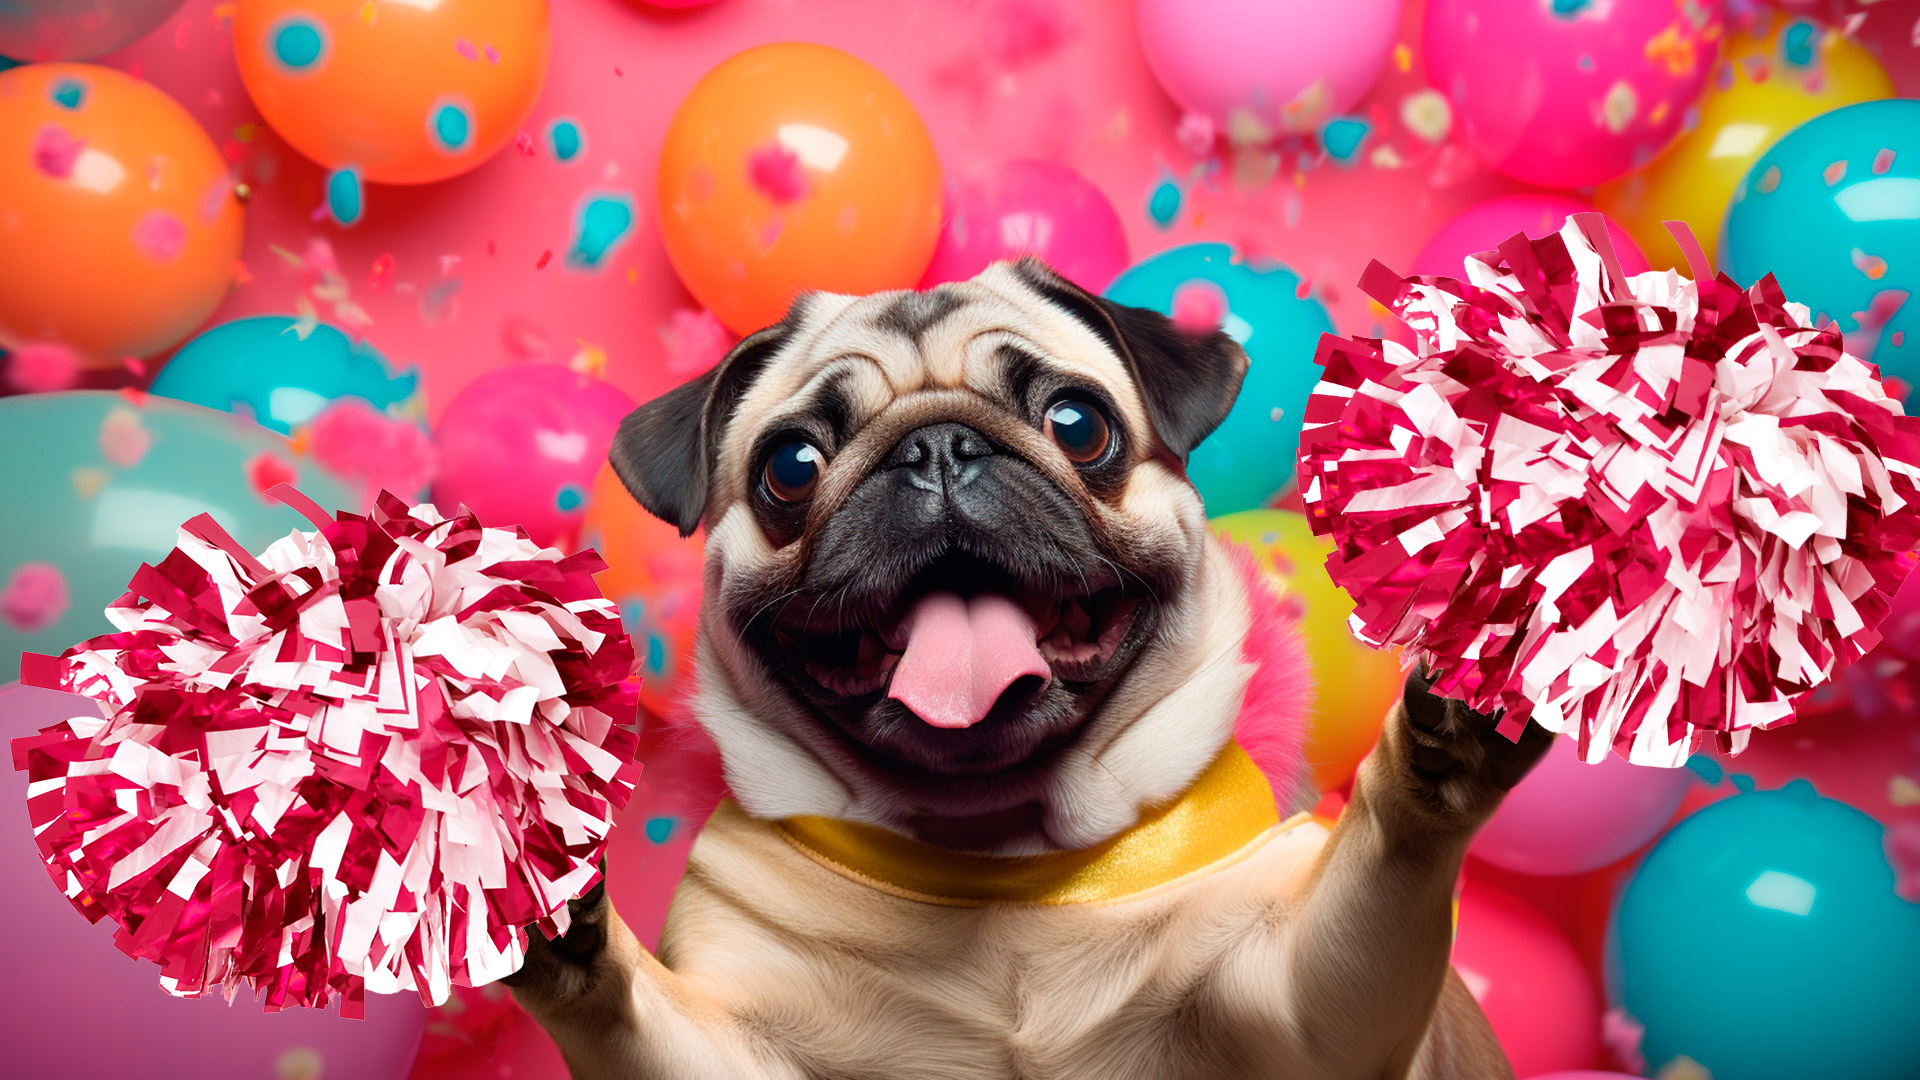 a lovely pug in a studio filled with festive balloons looks up and waves cheerleader pom-poms